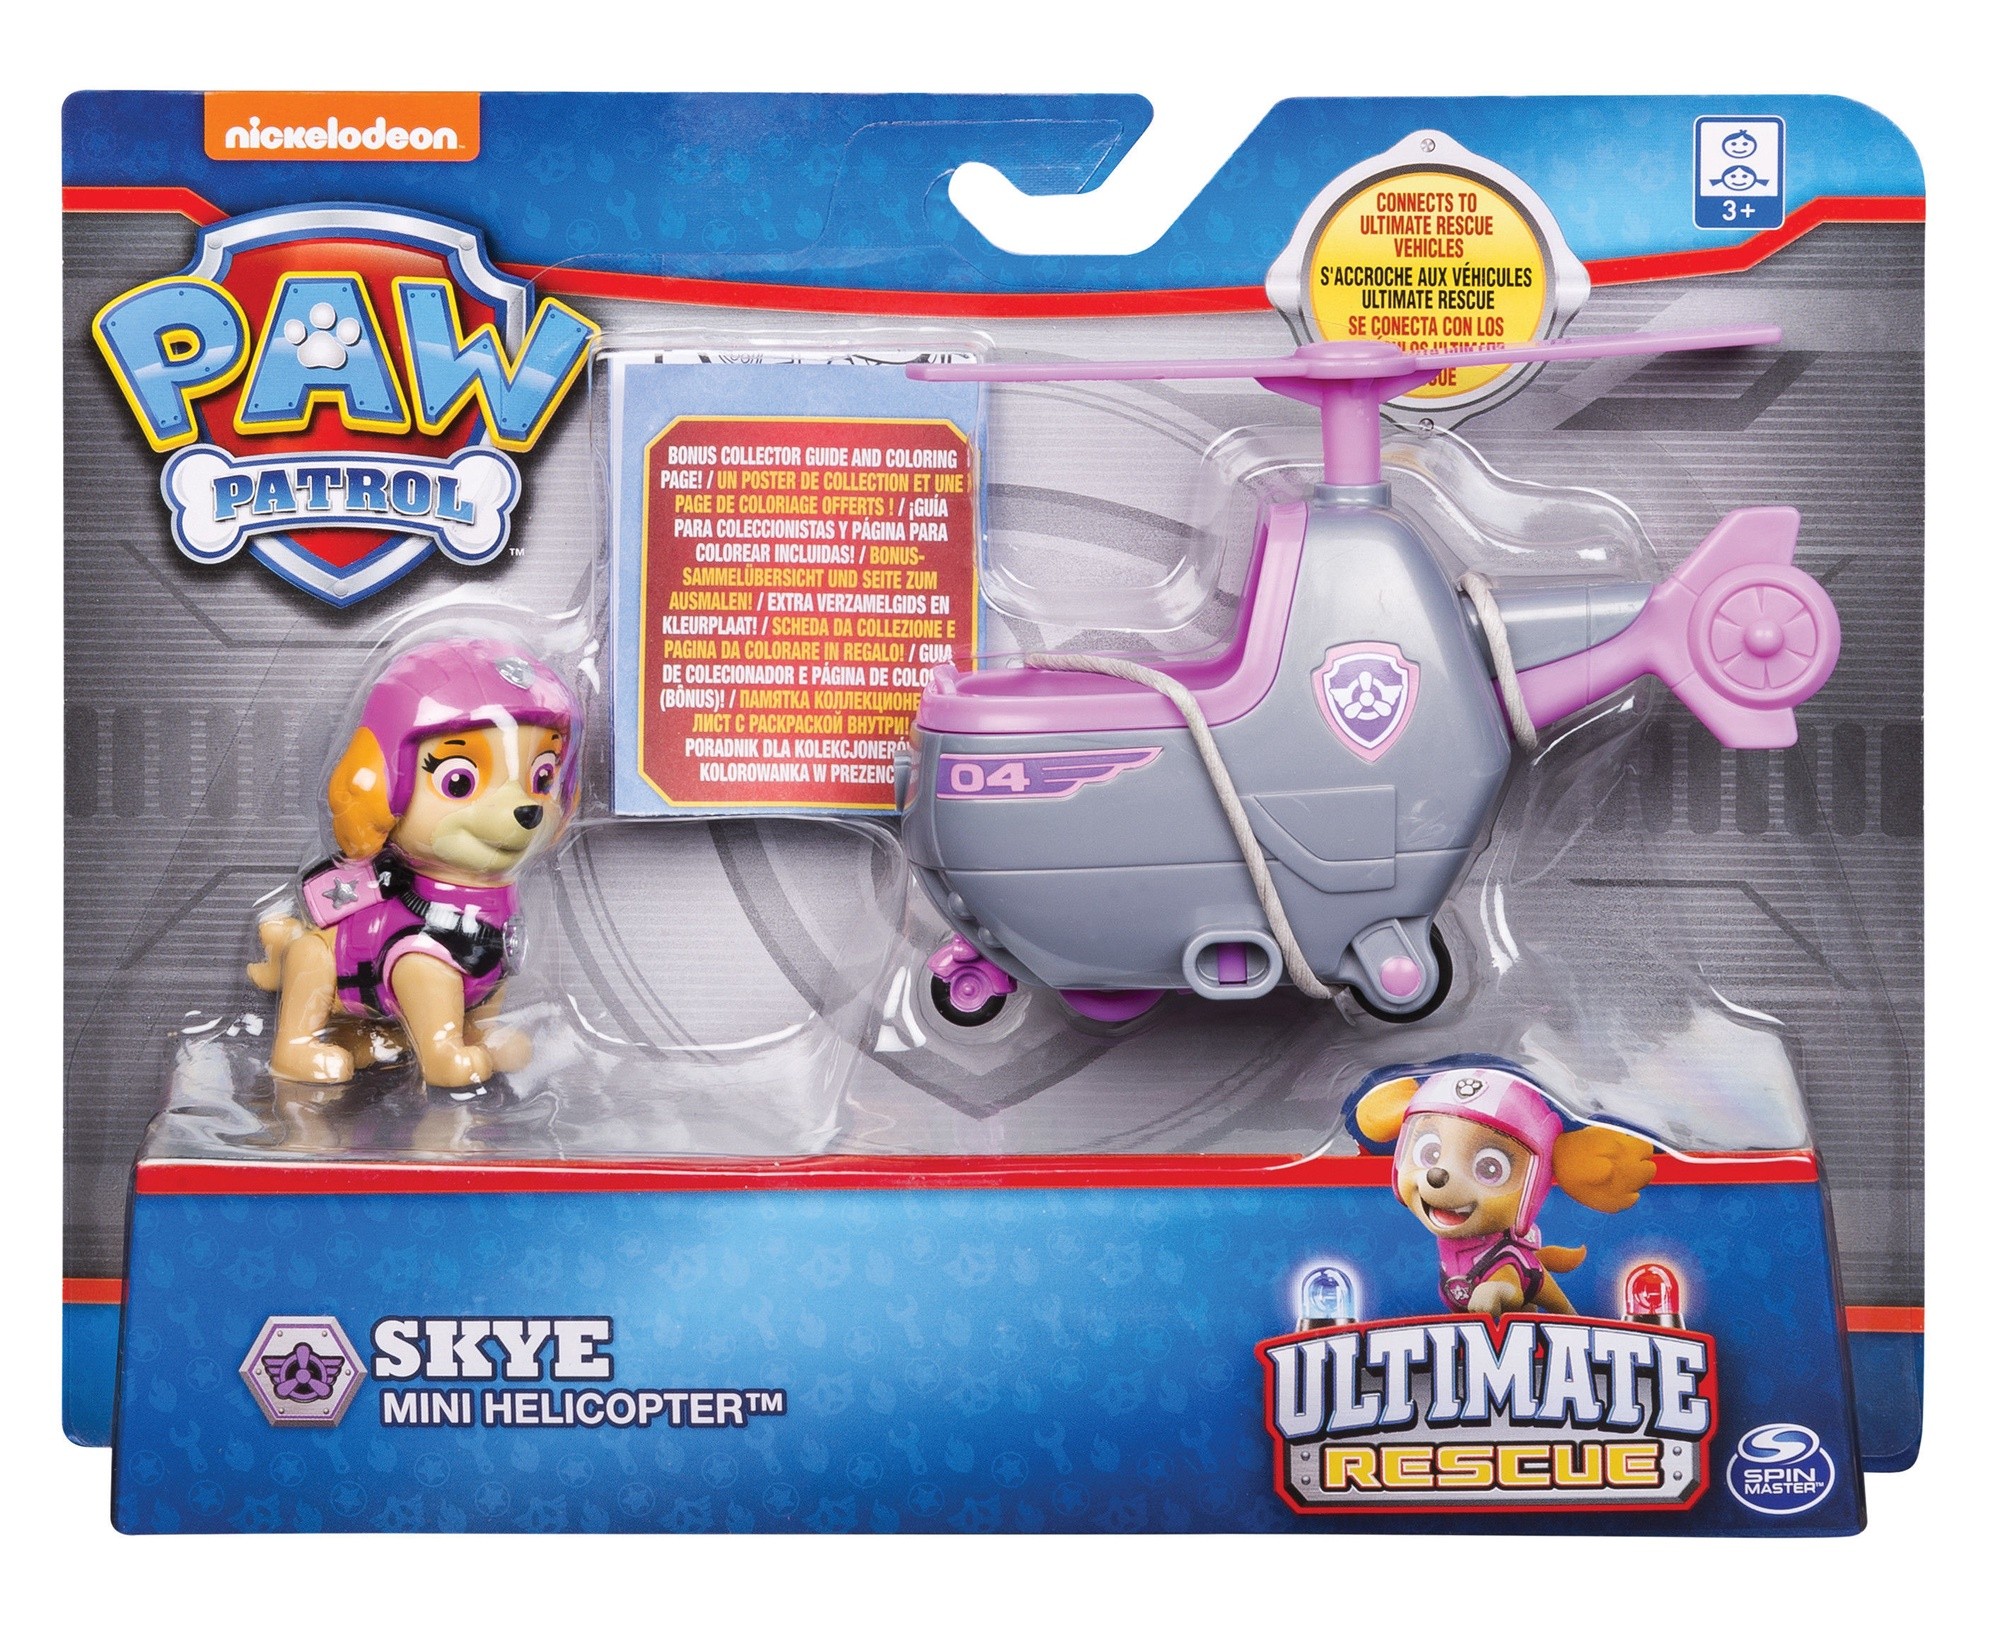 paw patrol ultimate rescue boat